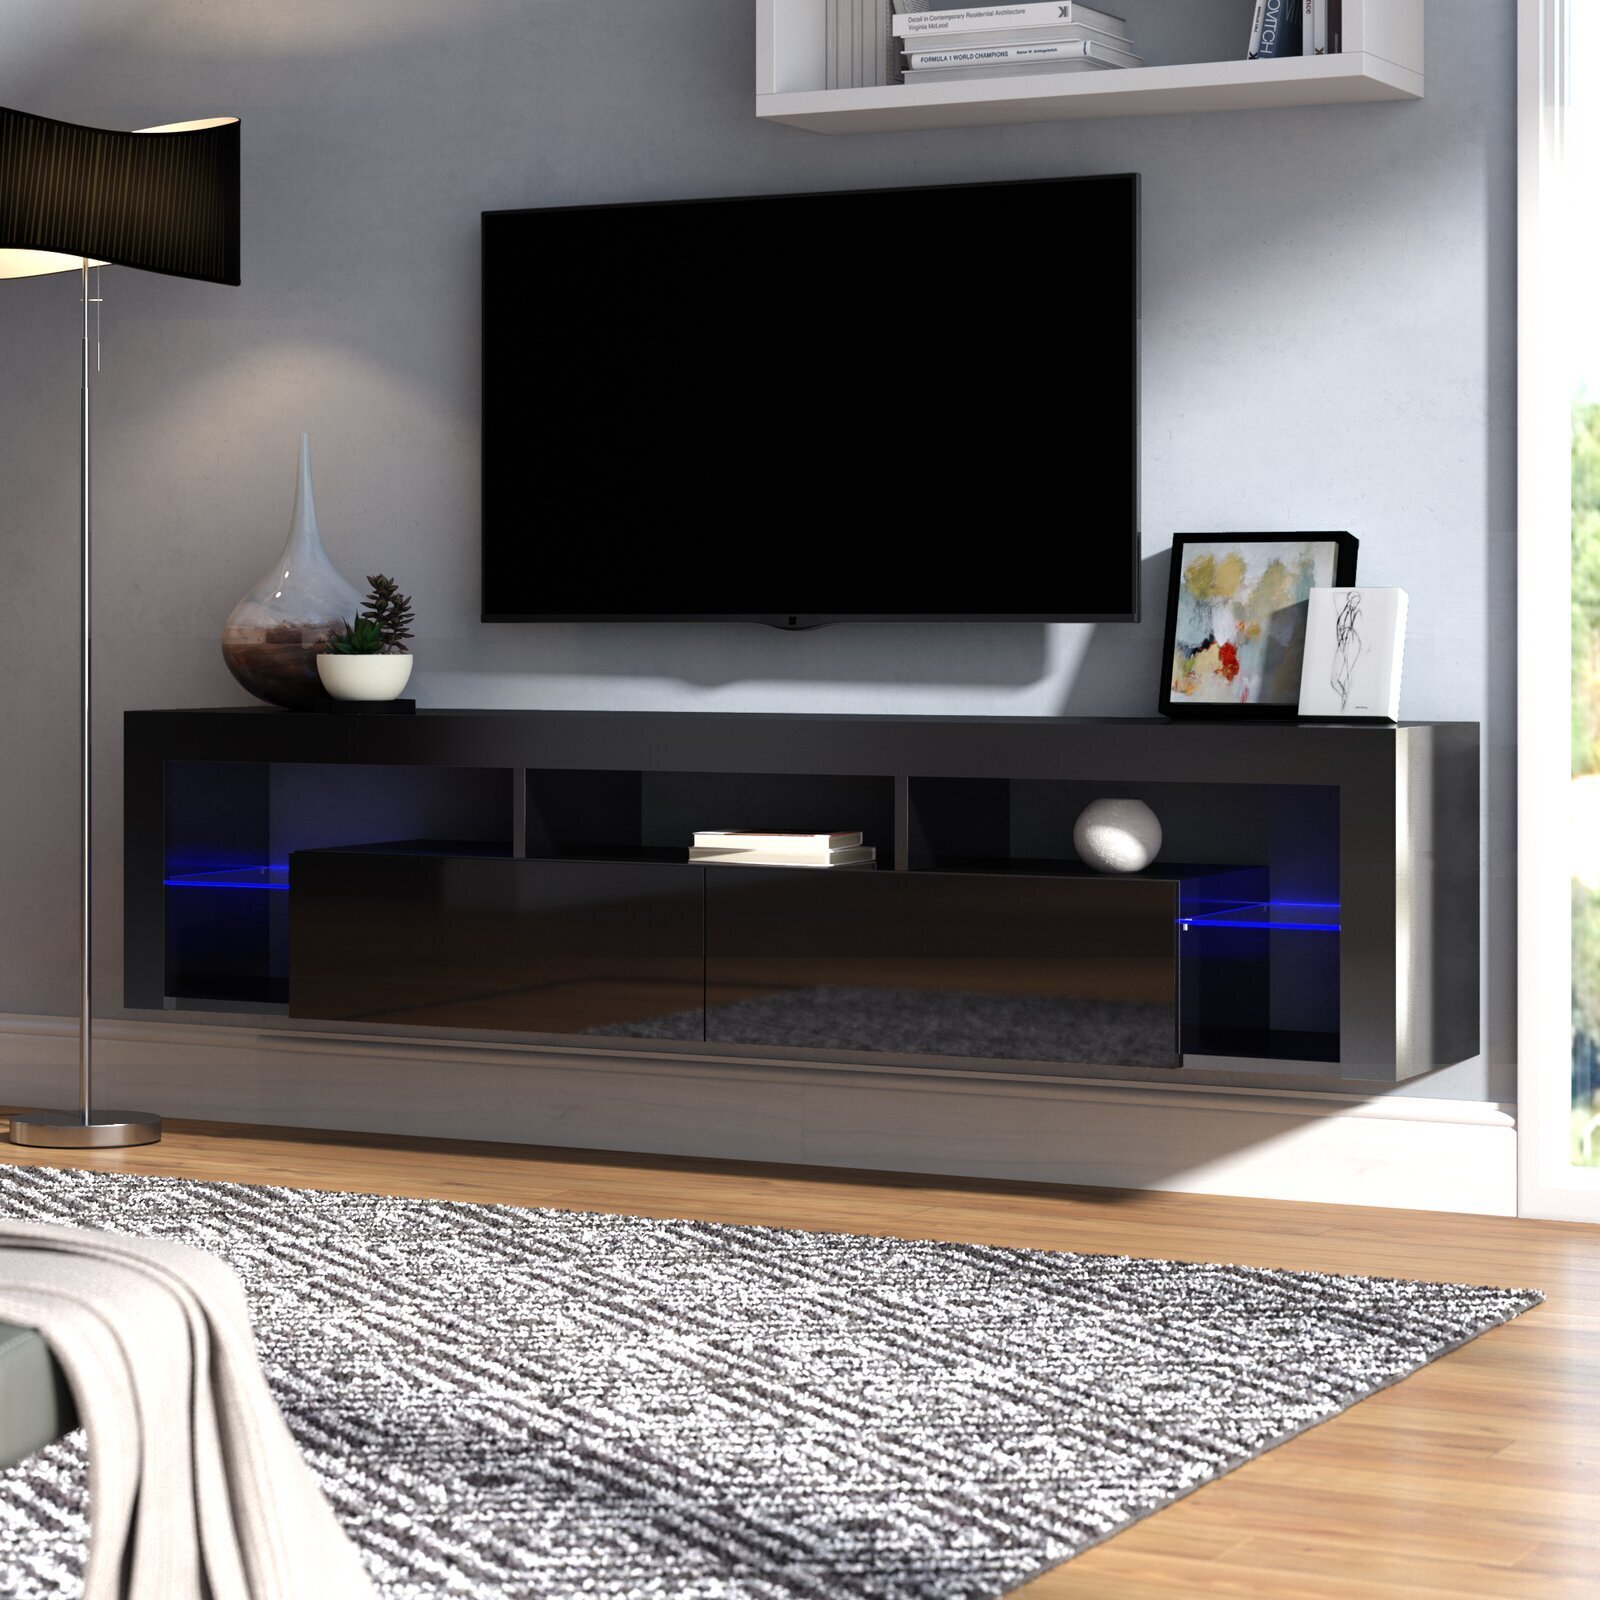 Stylish TV Stand With Clean Lines